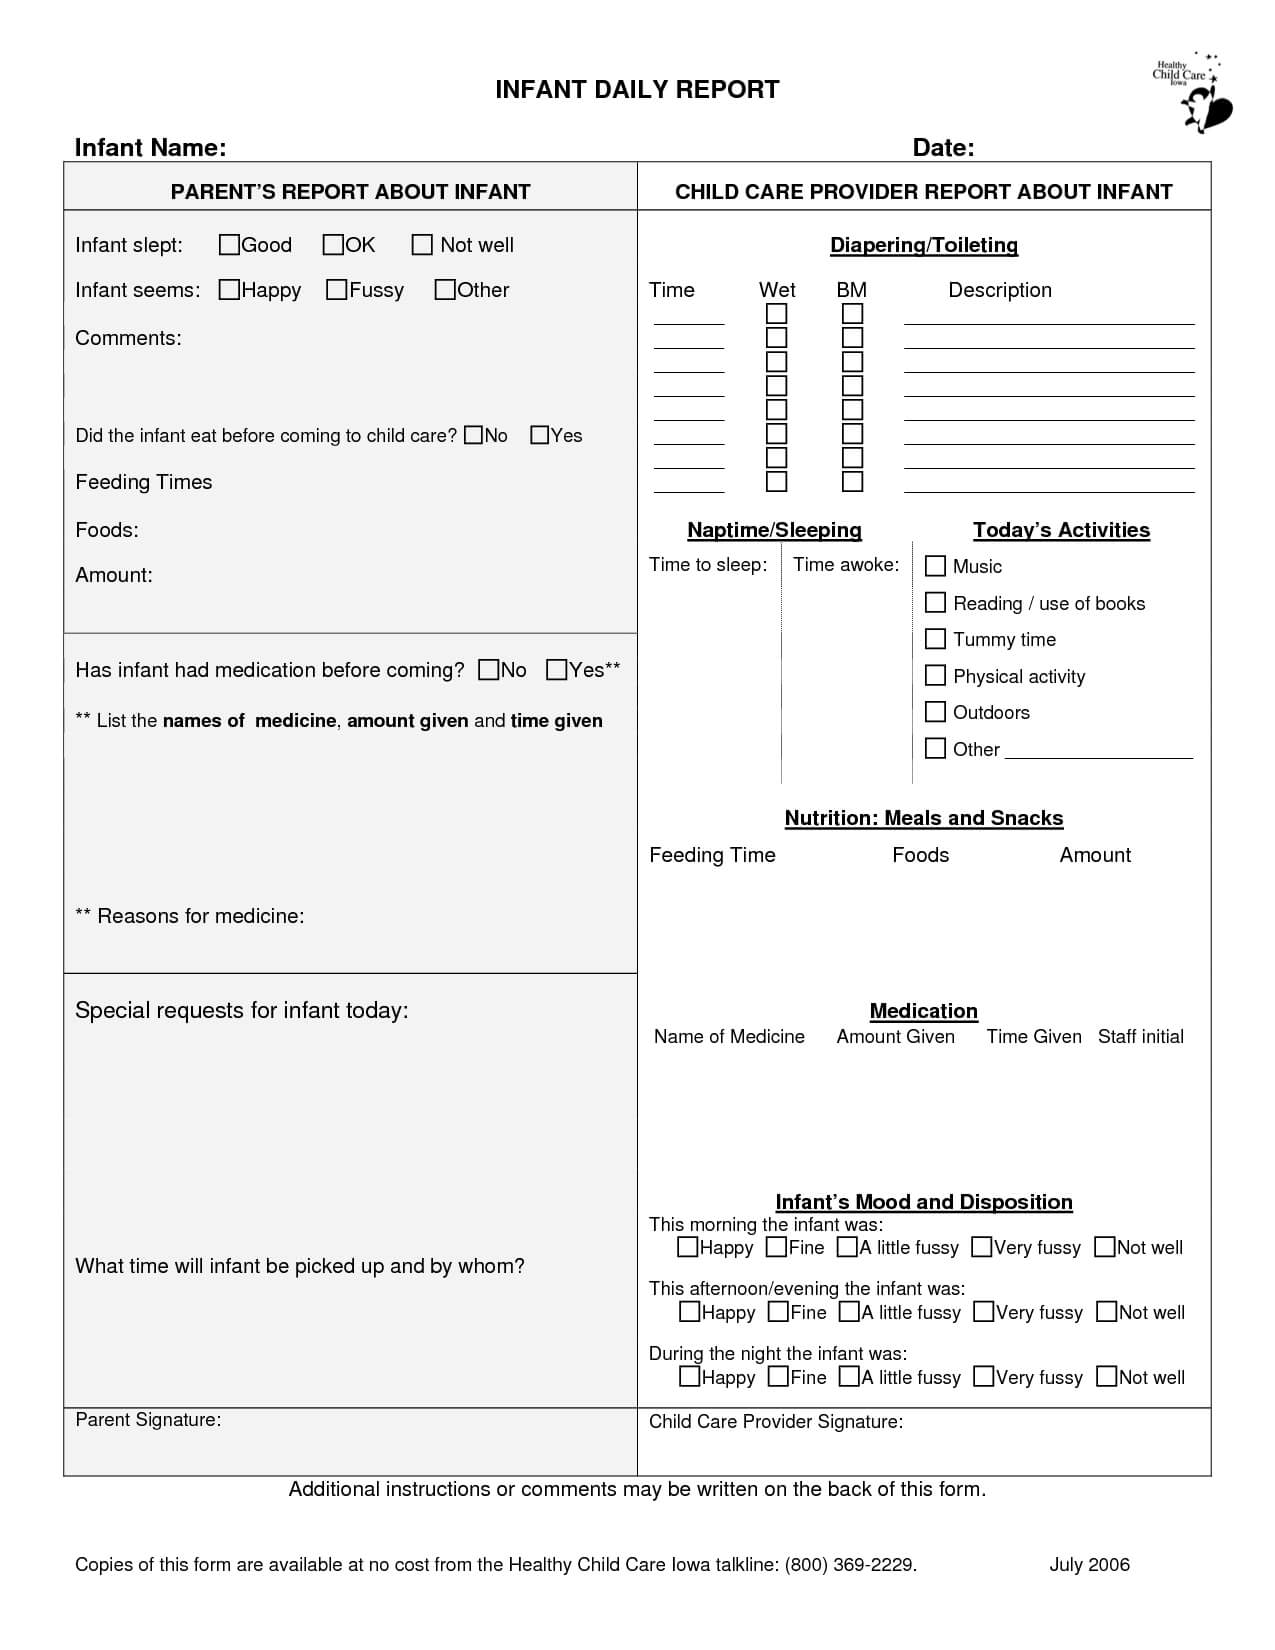 Infant Daily Report - Google Search | Home Daycare Ideas For Daycare Infant Daily Report Template